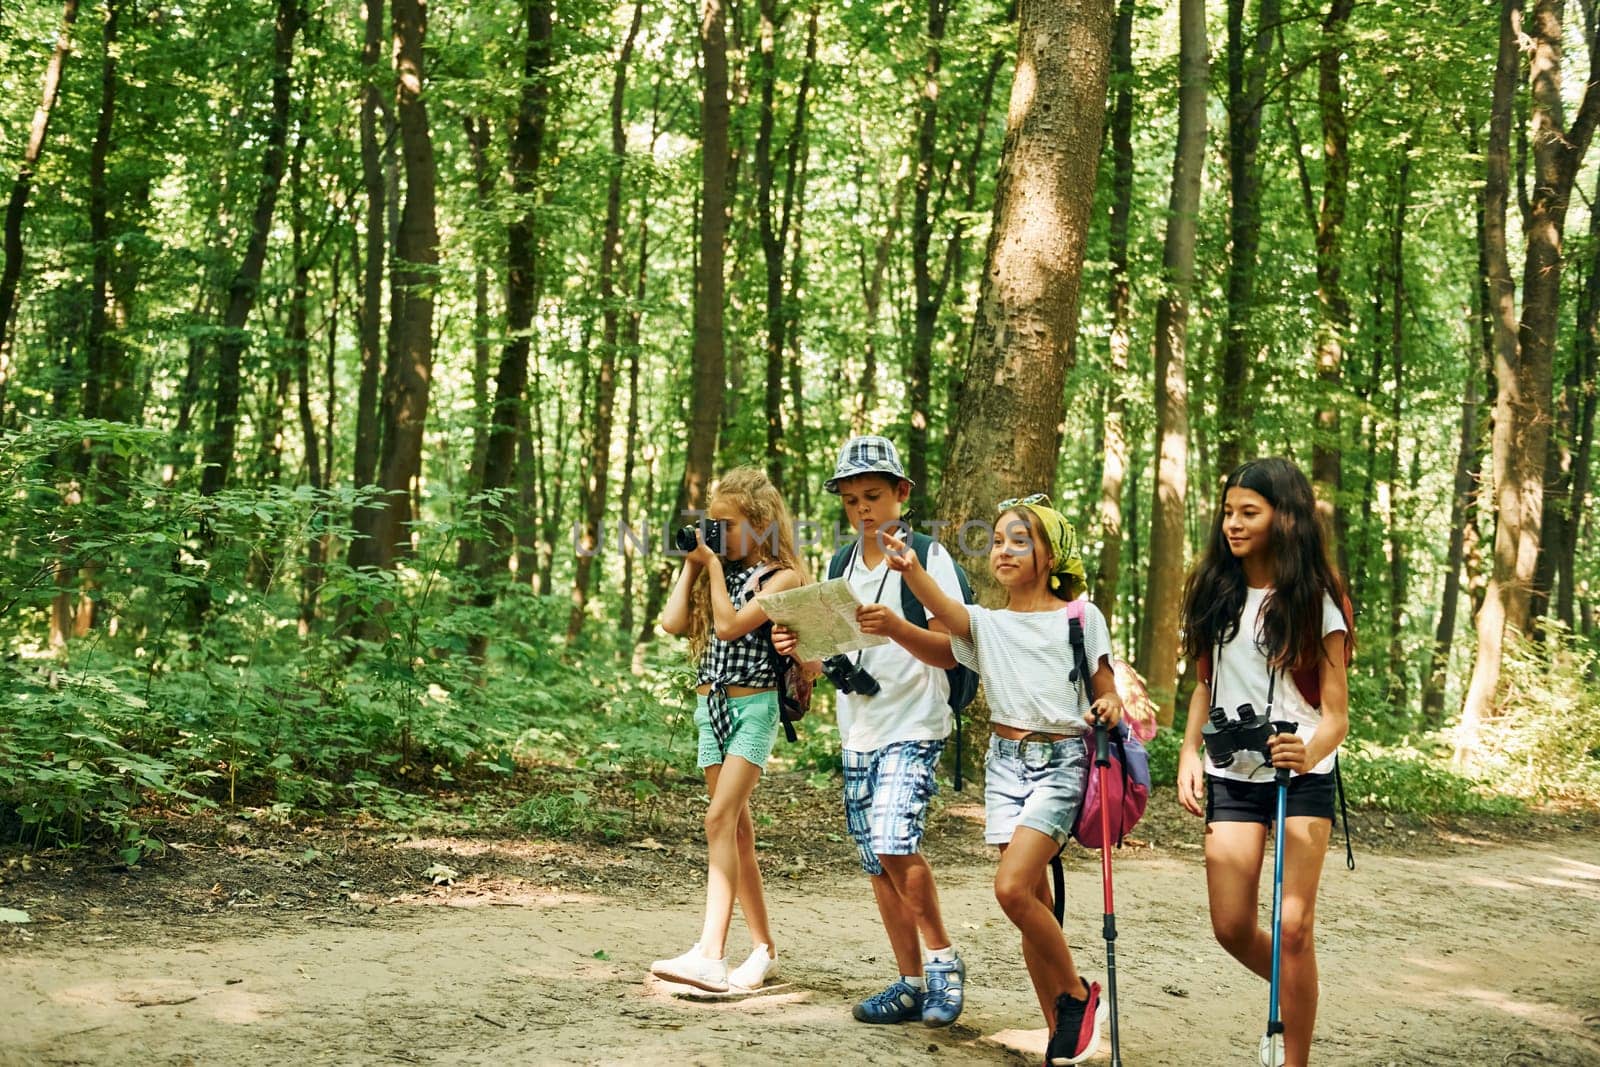 Summertime weekend. Kids strolling in the forest with travel equipment by Standret